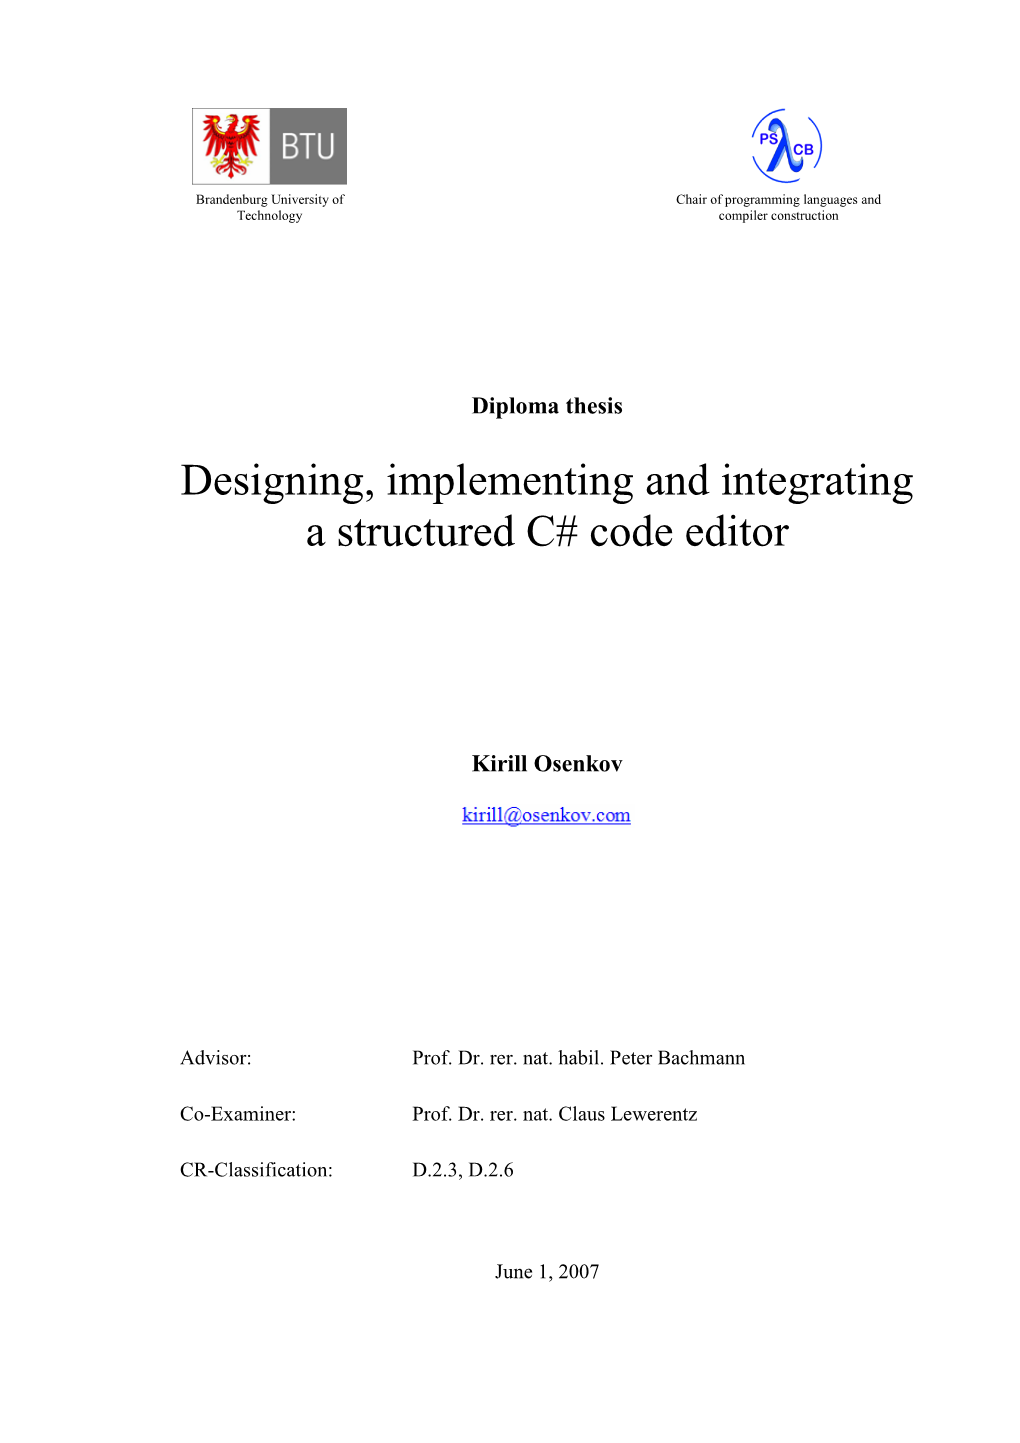 Diploma Thesis Designing, Implementing and Integrating a Structured C# Code Editor